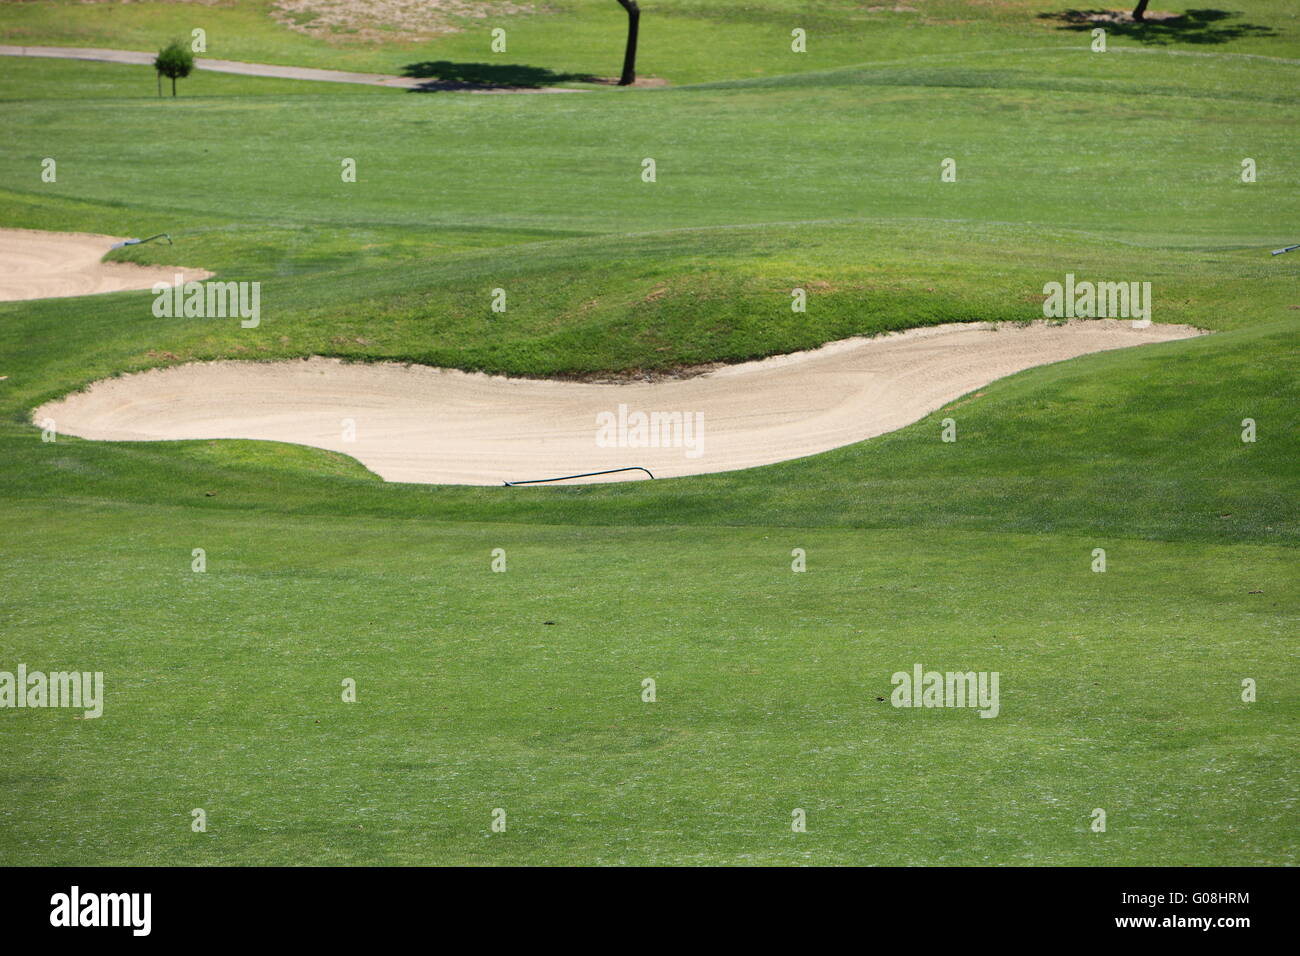 Sand trap or bunker on a golf course Stock Photo